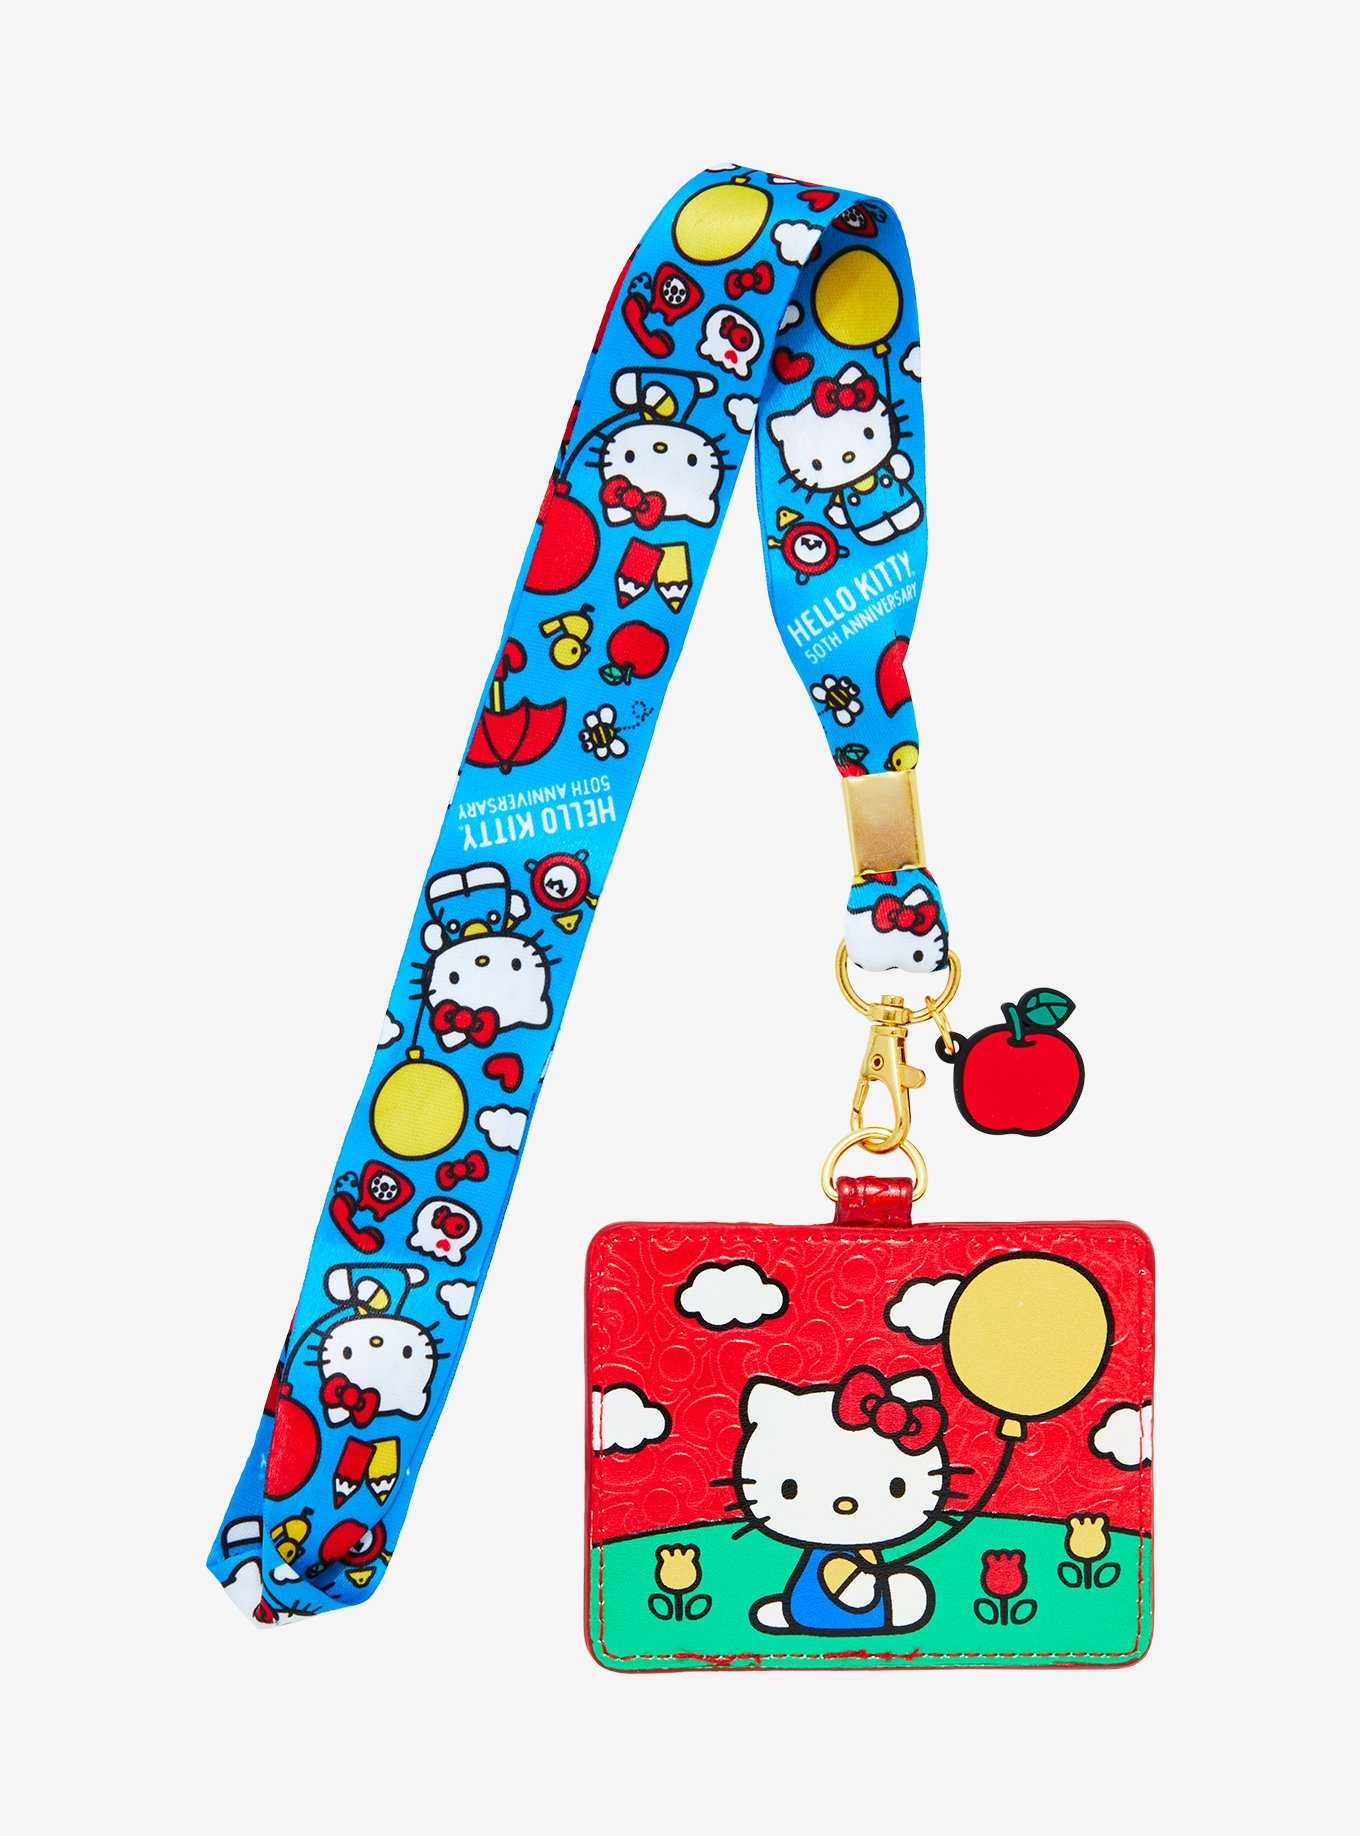 Cool Lanyards: Pop Culture, Character & Lanyards for Keys